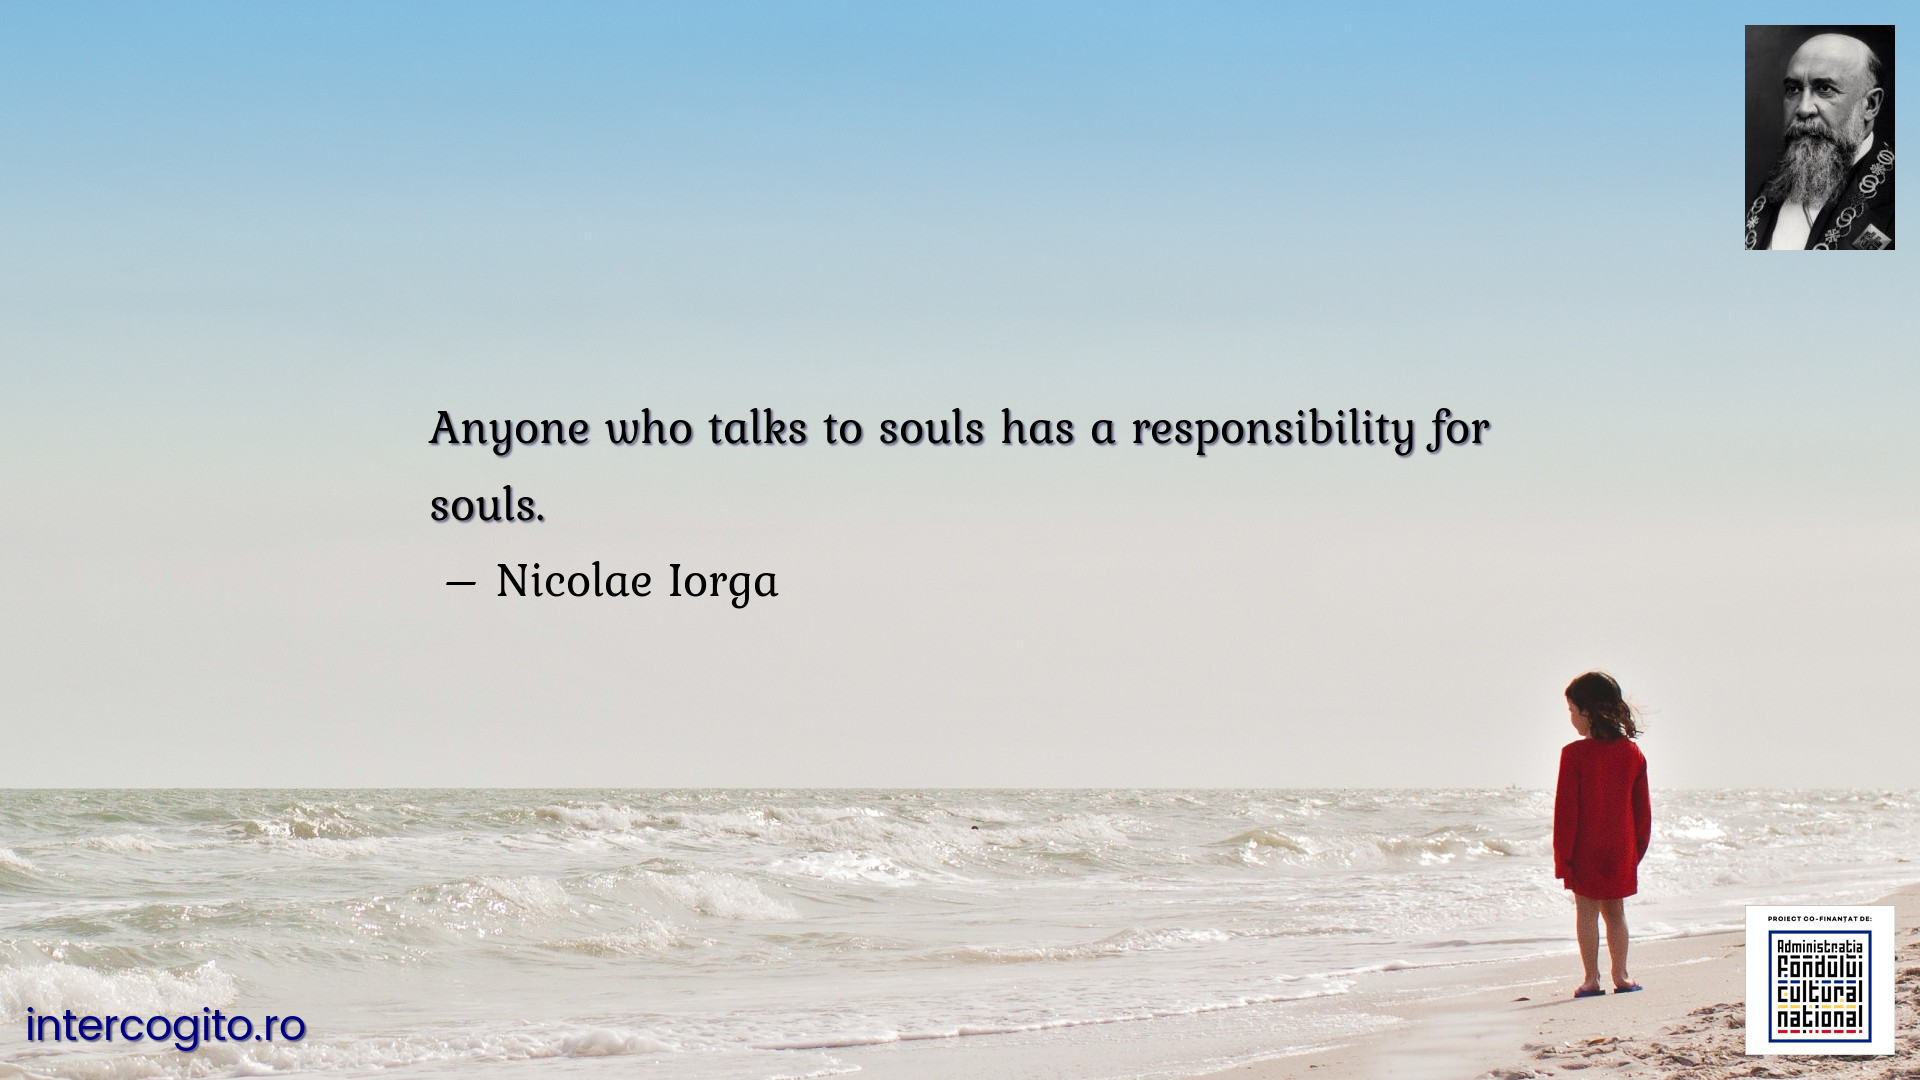 Anyone who talks to souls has a responsibility for souls.